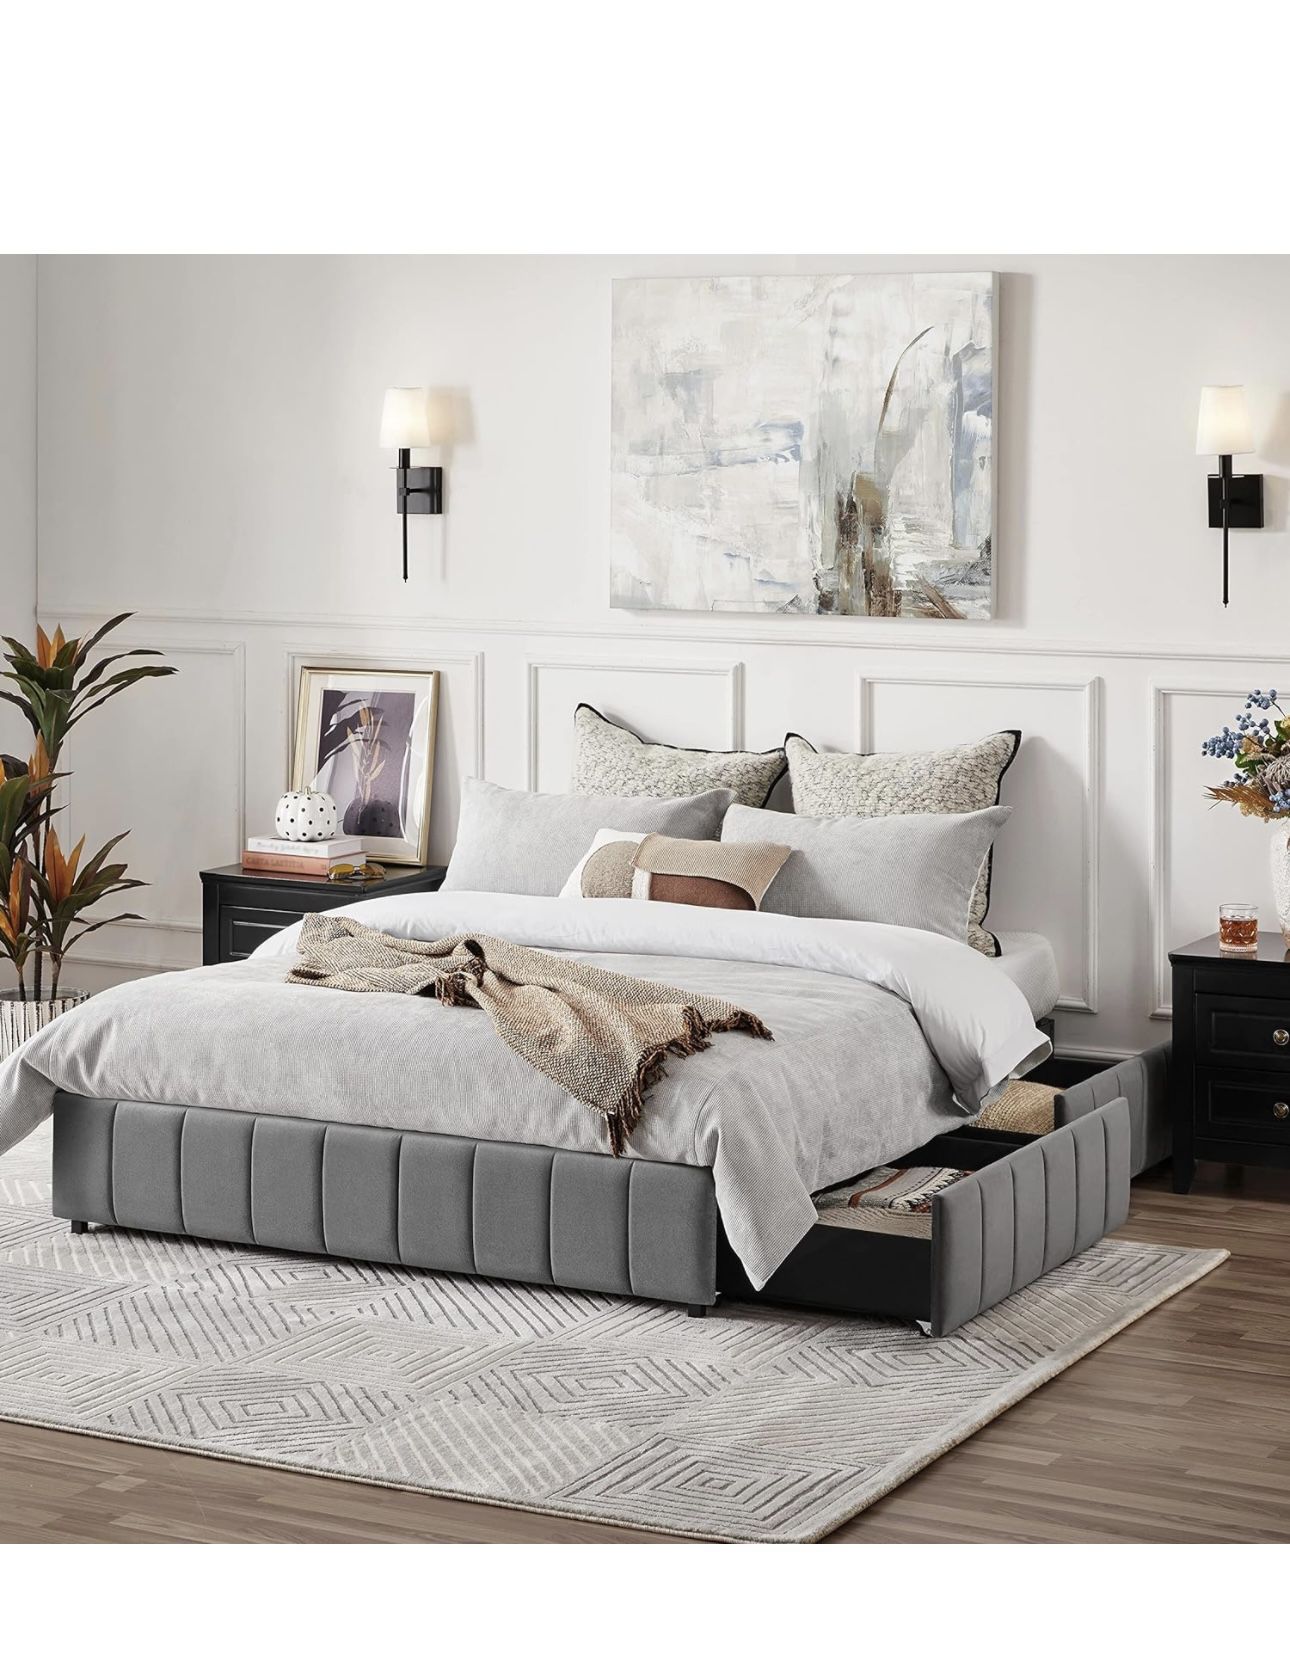 Bed Frame Upholstered Platform Bed with 4 Storage Drawers, Large Storage Space/Strong Wooden Slats/Non-Slip and Noise-Free/No Fixed Headboard/No Box S